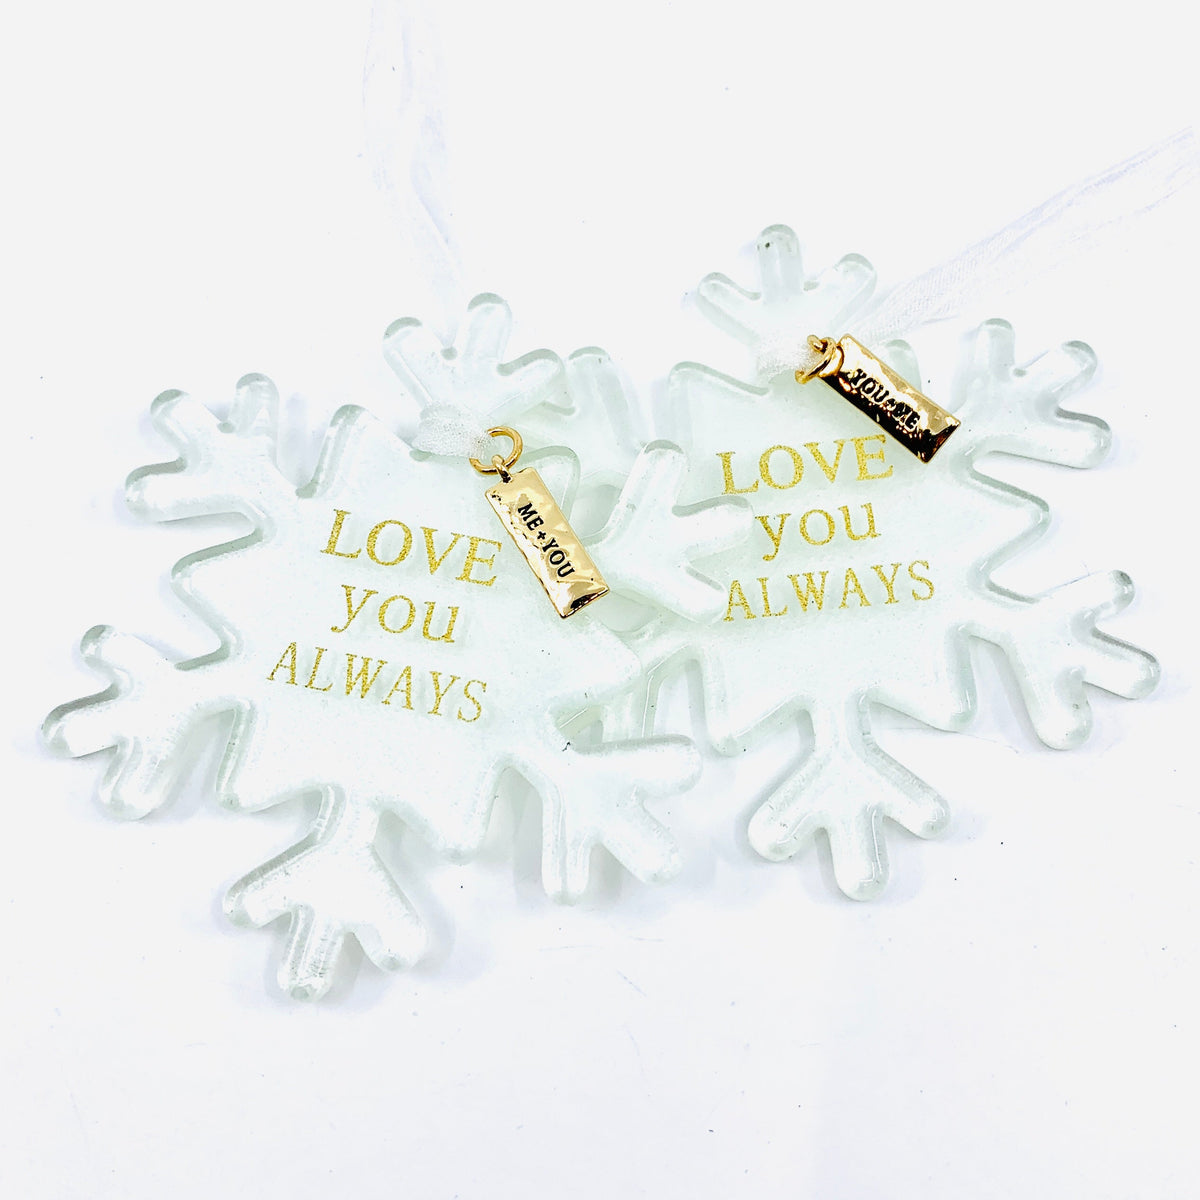 Love You Always. One To Keep, One To Share Ornament Set Decor Demdaco 